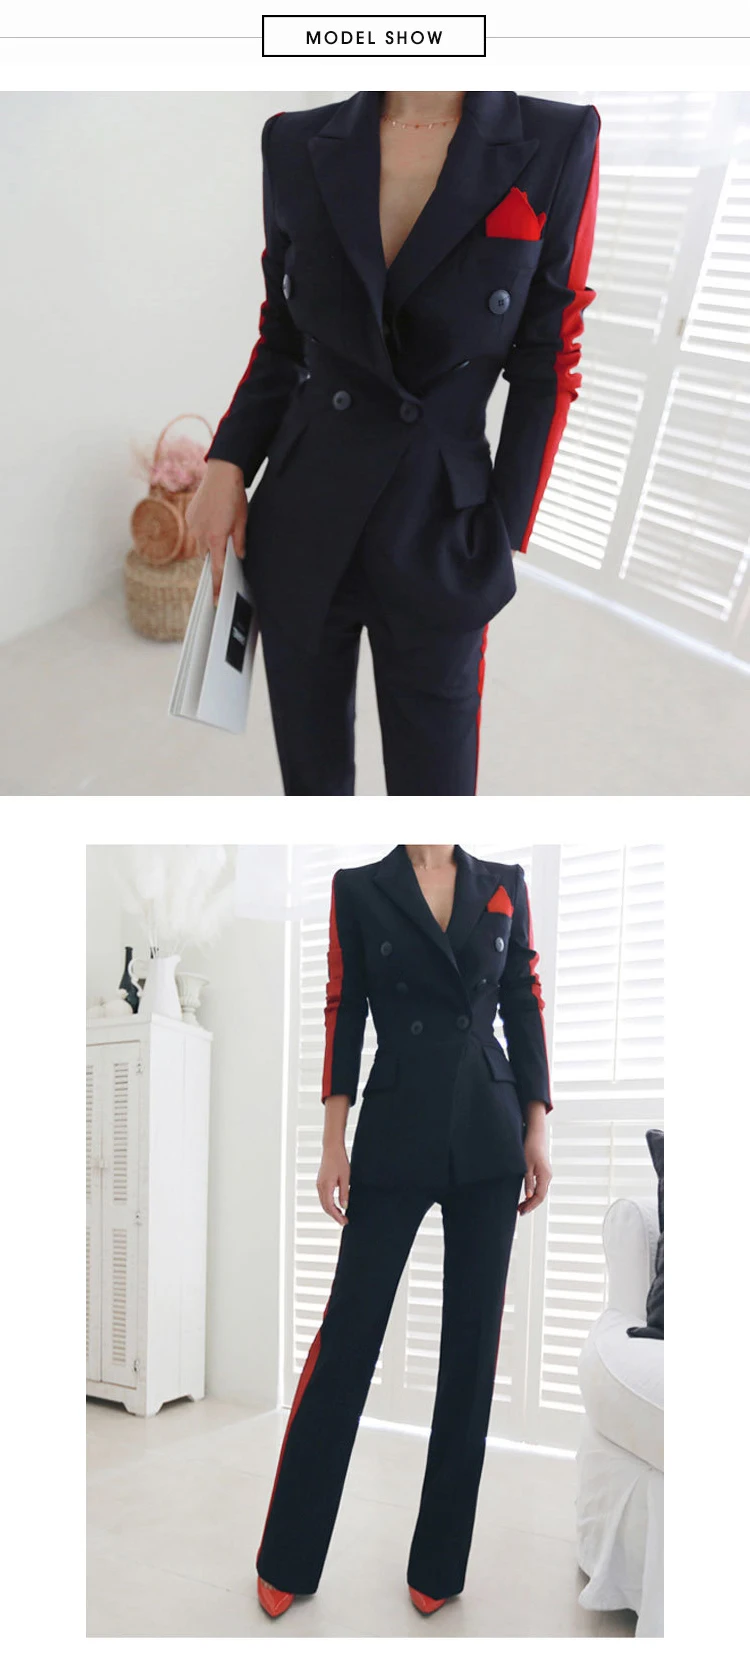 New arrival women high quality temperament fashion wild suit slim pant comfortable thick warm trend outdoor office pant suits